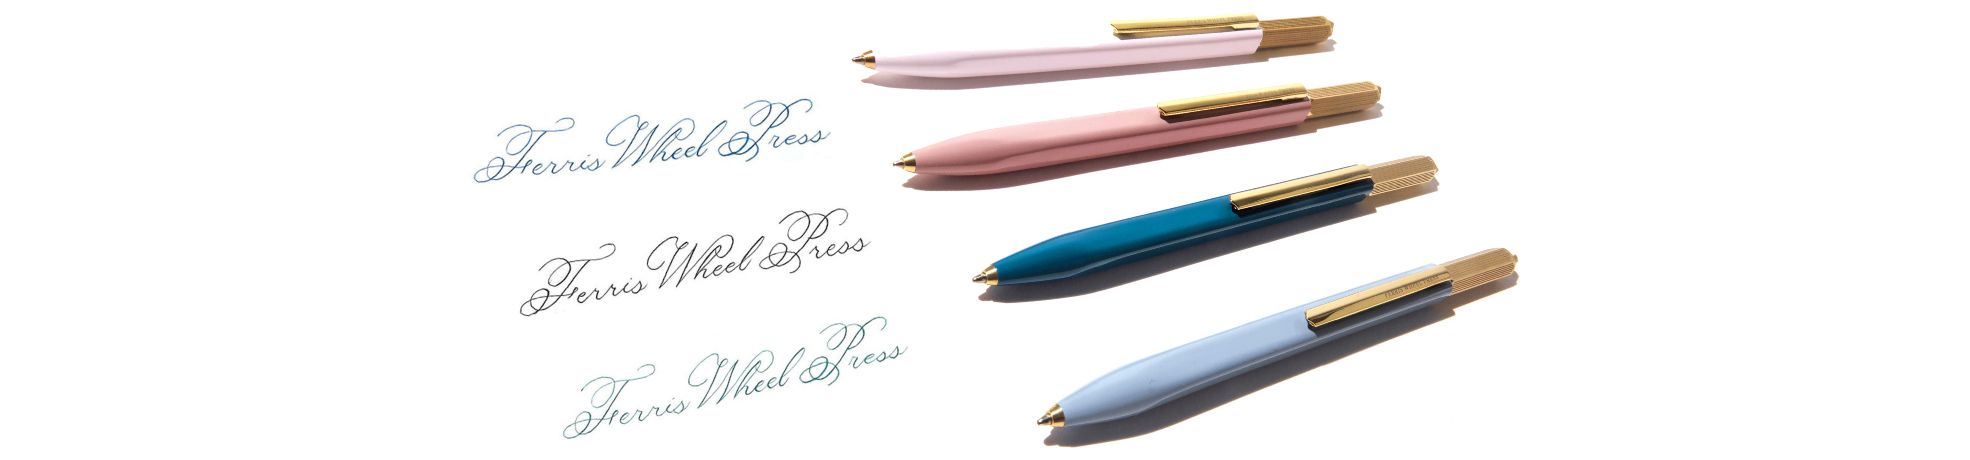 Rollerball Pens and Rollerball Gel Pens Collection - Paper Kooka